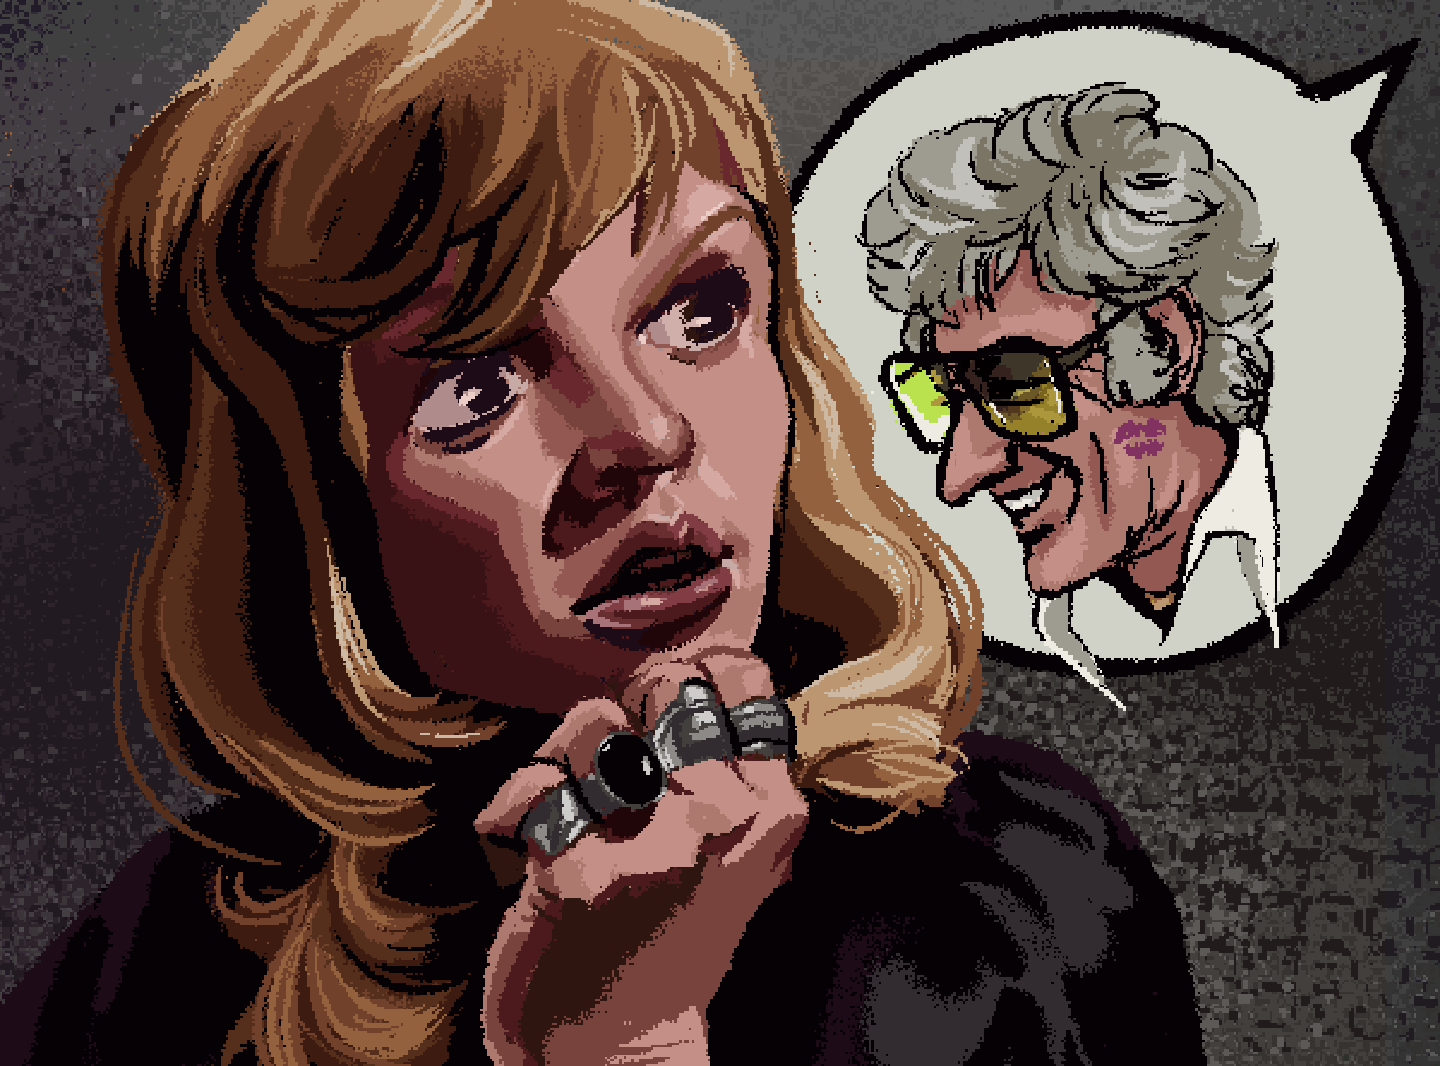 Pixel art drawing of Jo Grant from Doctor Who looking to the right while a speech bubble comes from the right side of the screen with a picture of the third Doctor in it. Jo has pale skin, long strawberry-blonde hair, and rings on each finger as she holds her hand up to her face. The third doctor is a pale-skinned older man with fluffy, wavy gray hair and a large nose. He is wearing sunglasses and smiling, and he has a lipstick mark on his cheek.